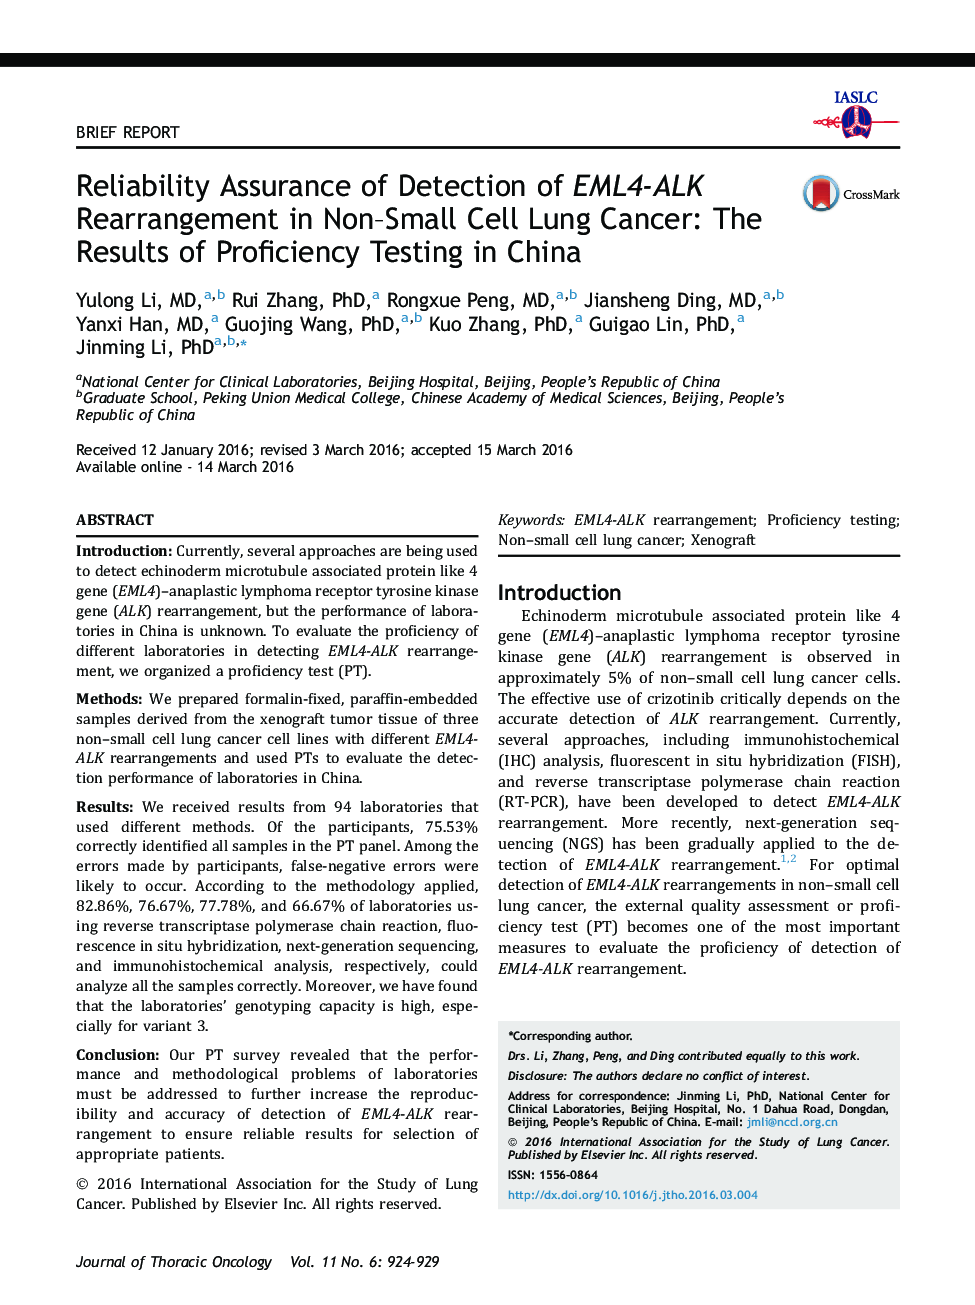 Reliability Assurance of Detection of EML4-ALK Rearrangement in Non-Small Cell Lung Cancer: The Results of Proficiency Testing in China